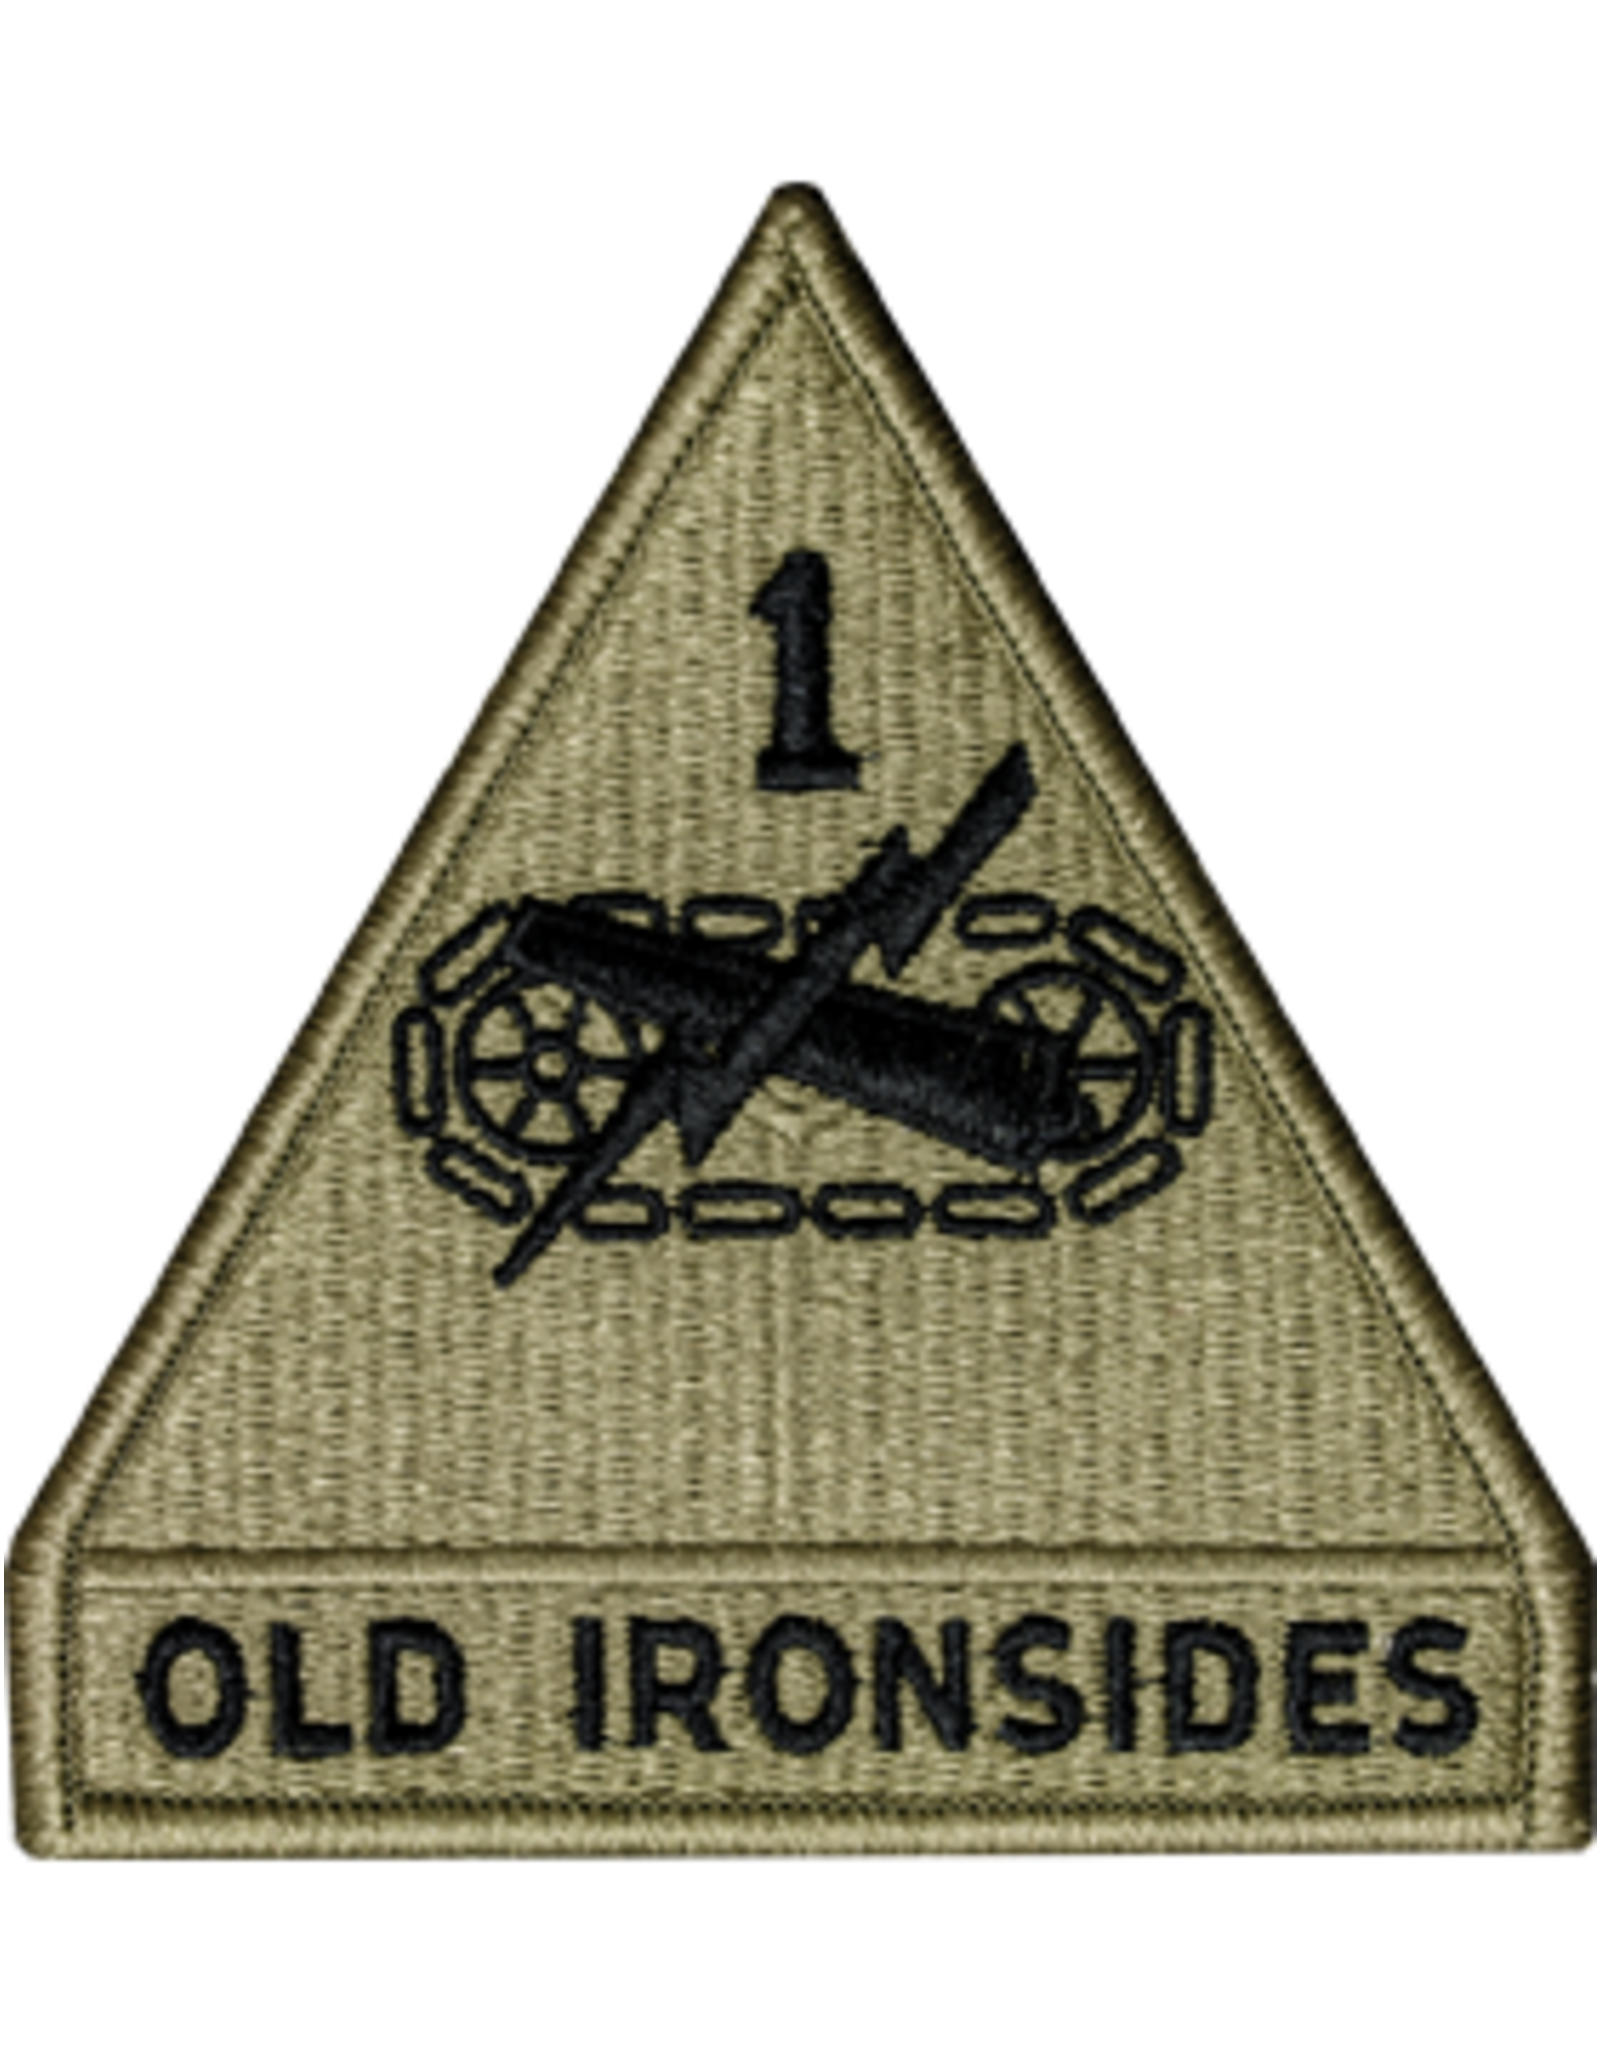 1st Armor Patch (Old Ironsides)